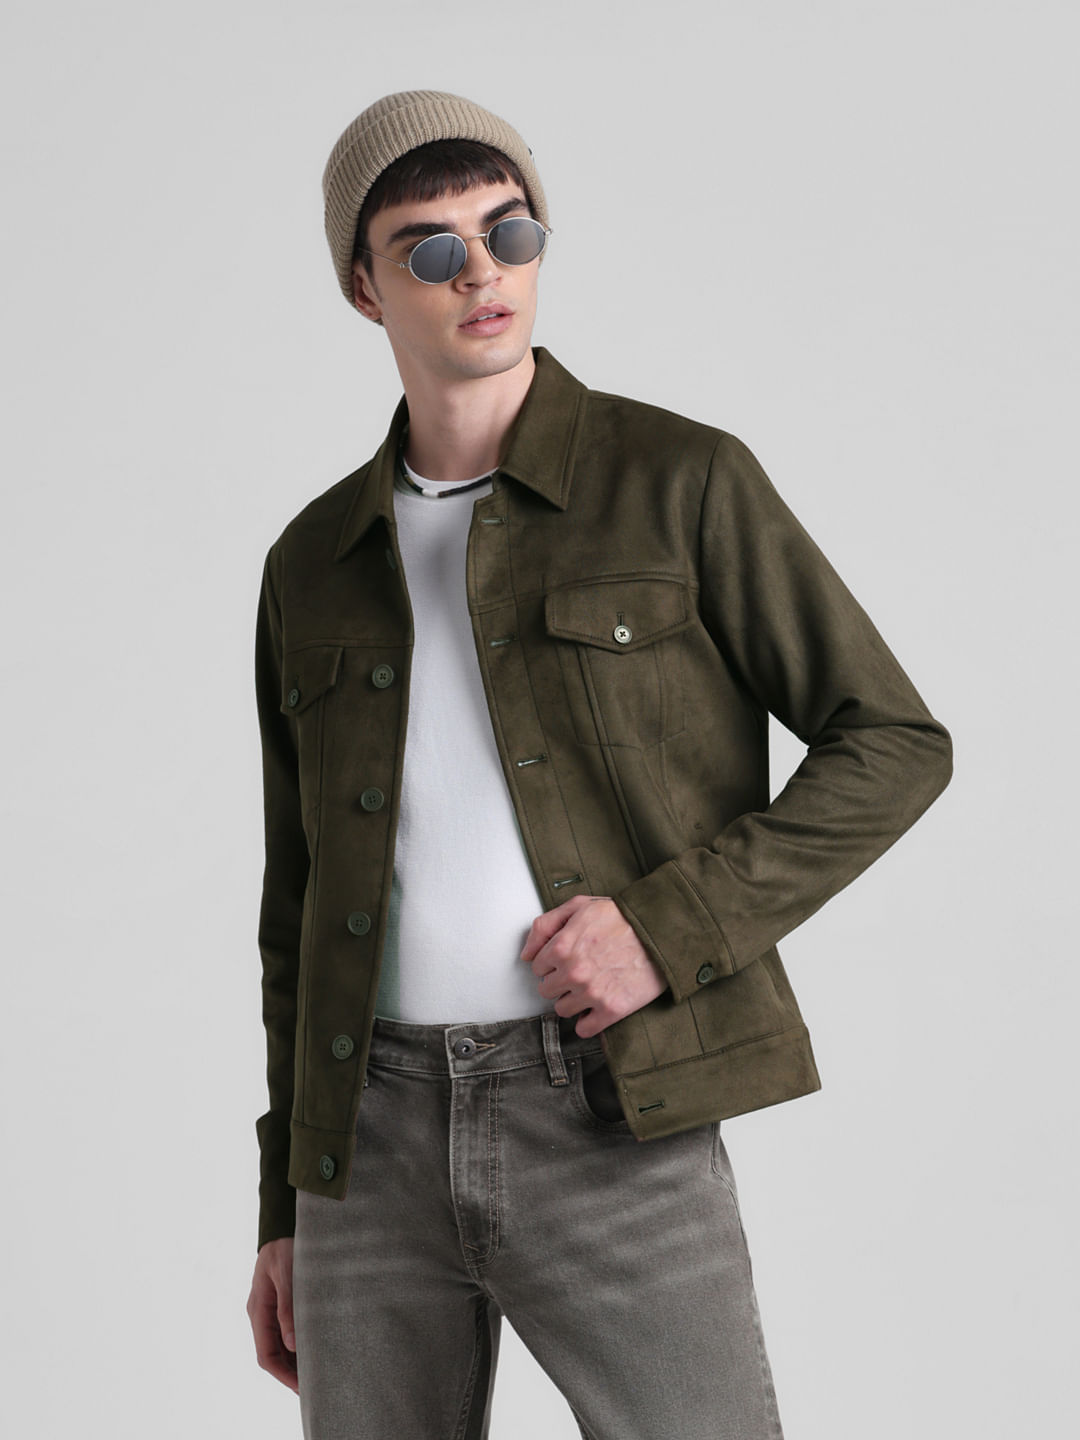 Buy Green Jackets & Coats for Men by The Indian Garage Co Online | Ajio.com